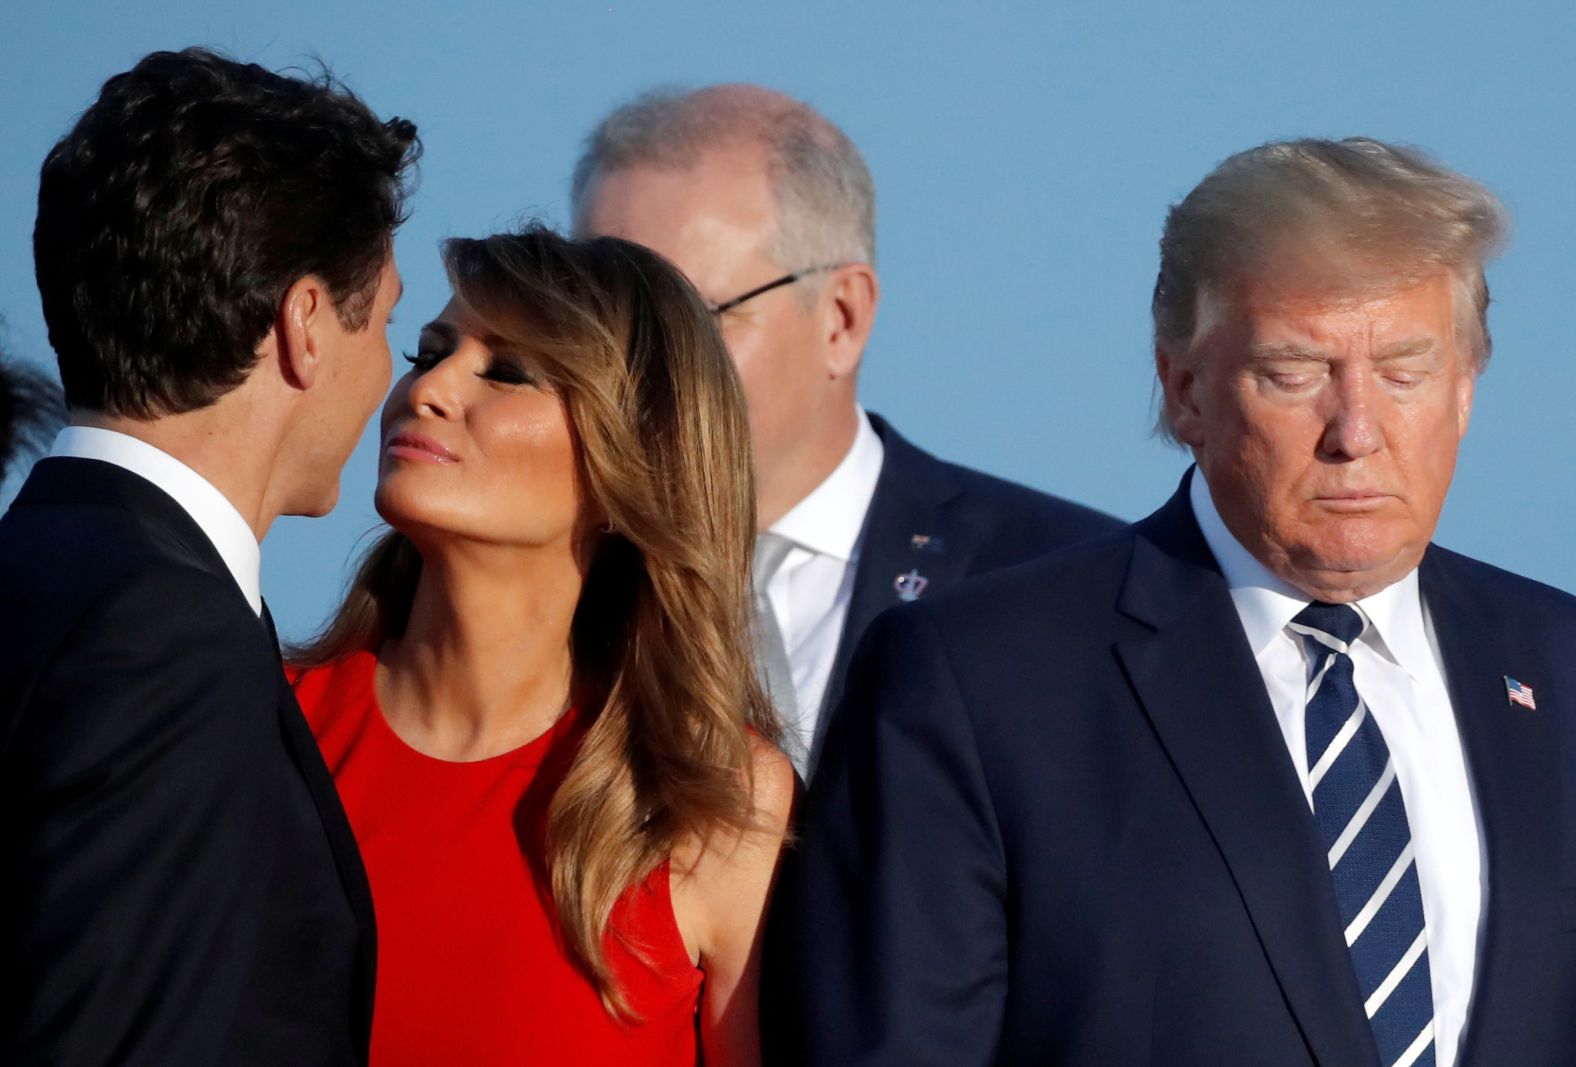 Melania Trump greets Canadian Prime Minister Justin Trudeau with a kiss on the cheek prior to a group photo at the G-7 summit in August 2019. <a href="index.php?page=&url=https%3A%2F%2Fwww.cnn.com%2Fvideos%2Fpolitics%2F2019%2F08%2F27%2Fdonald-trump-g7-summit-moos-pkg-vpx.cnn" target="_blank">The photo quickly circulated on social media.</a>